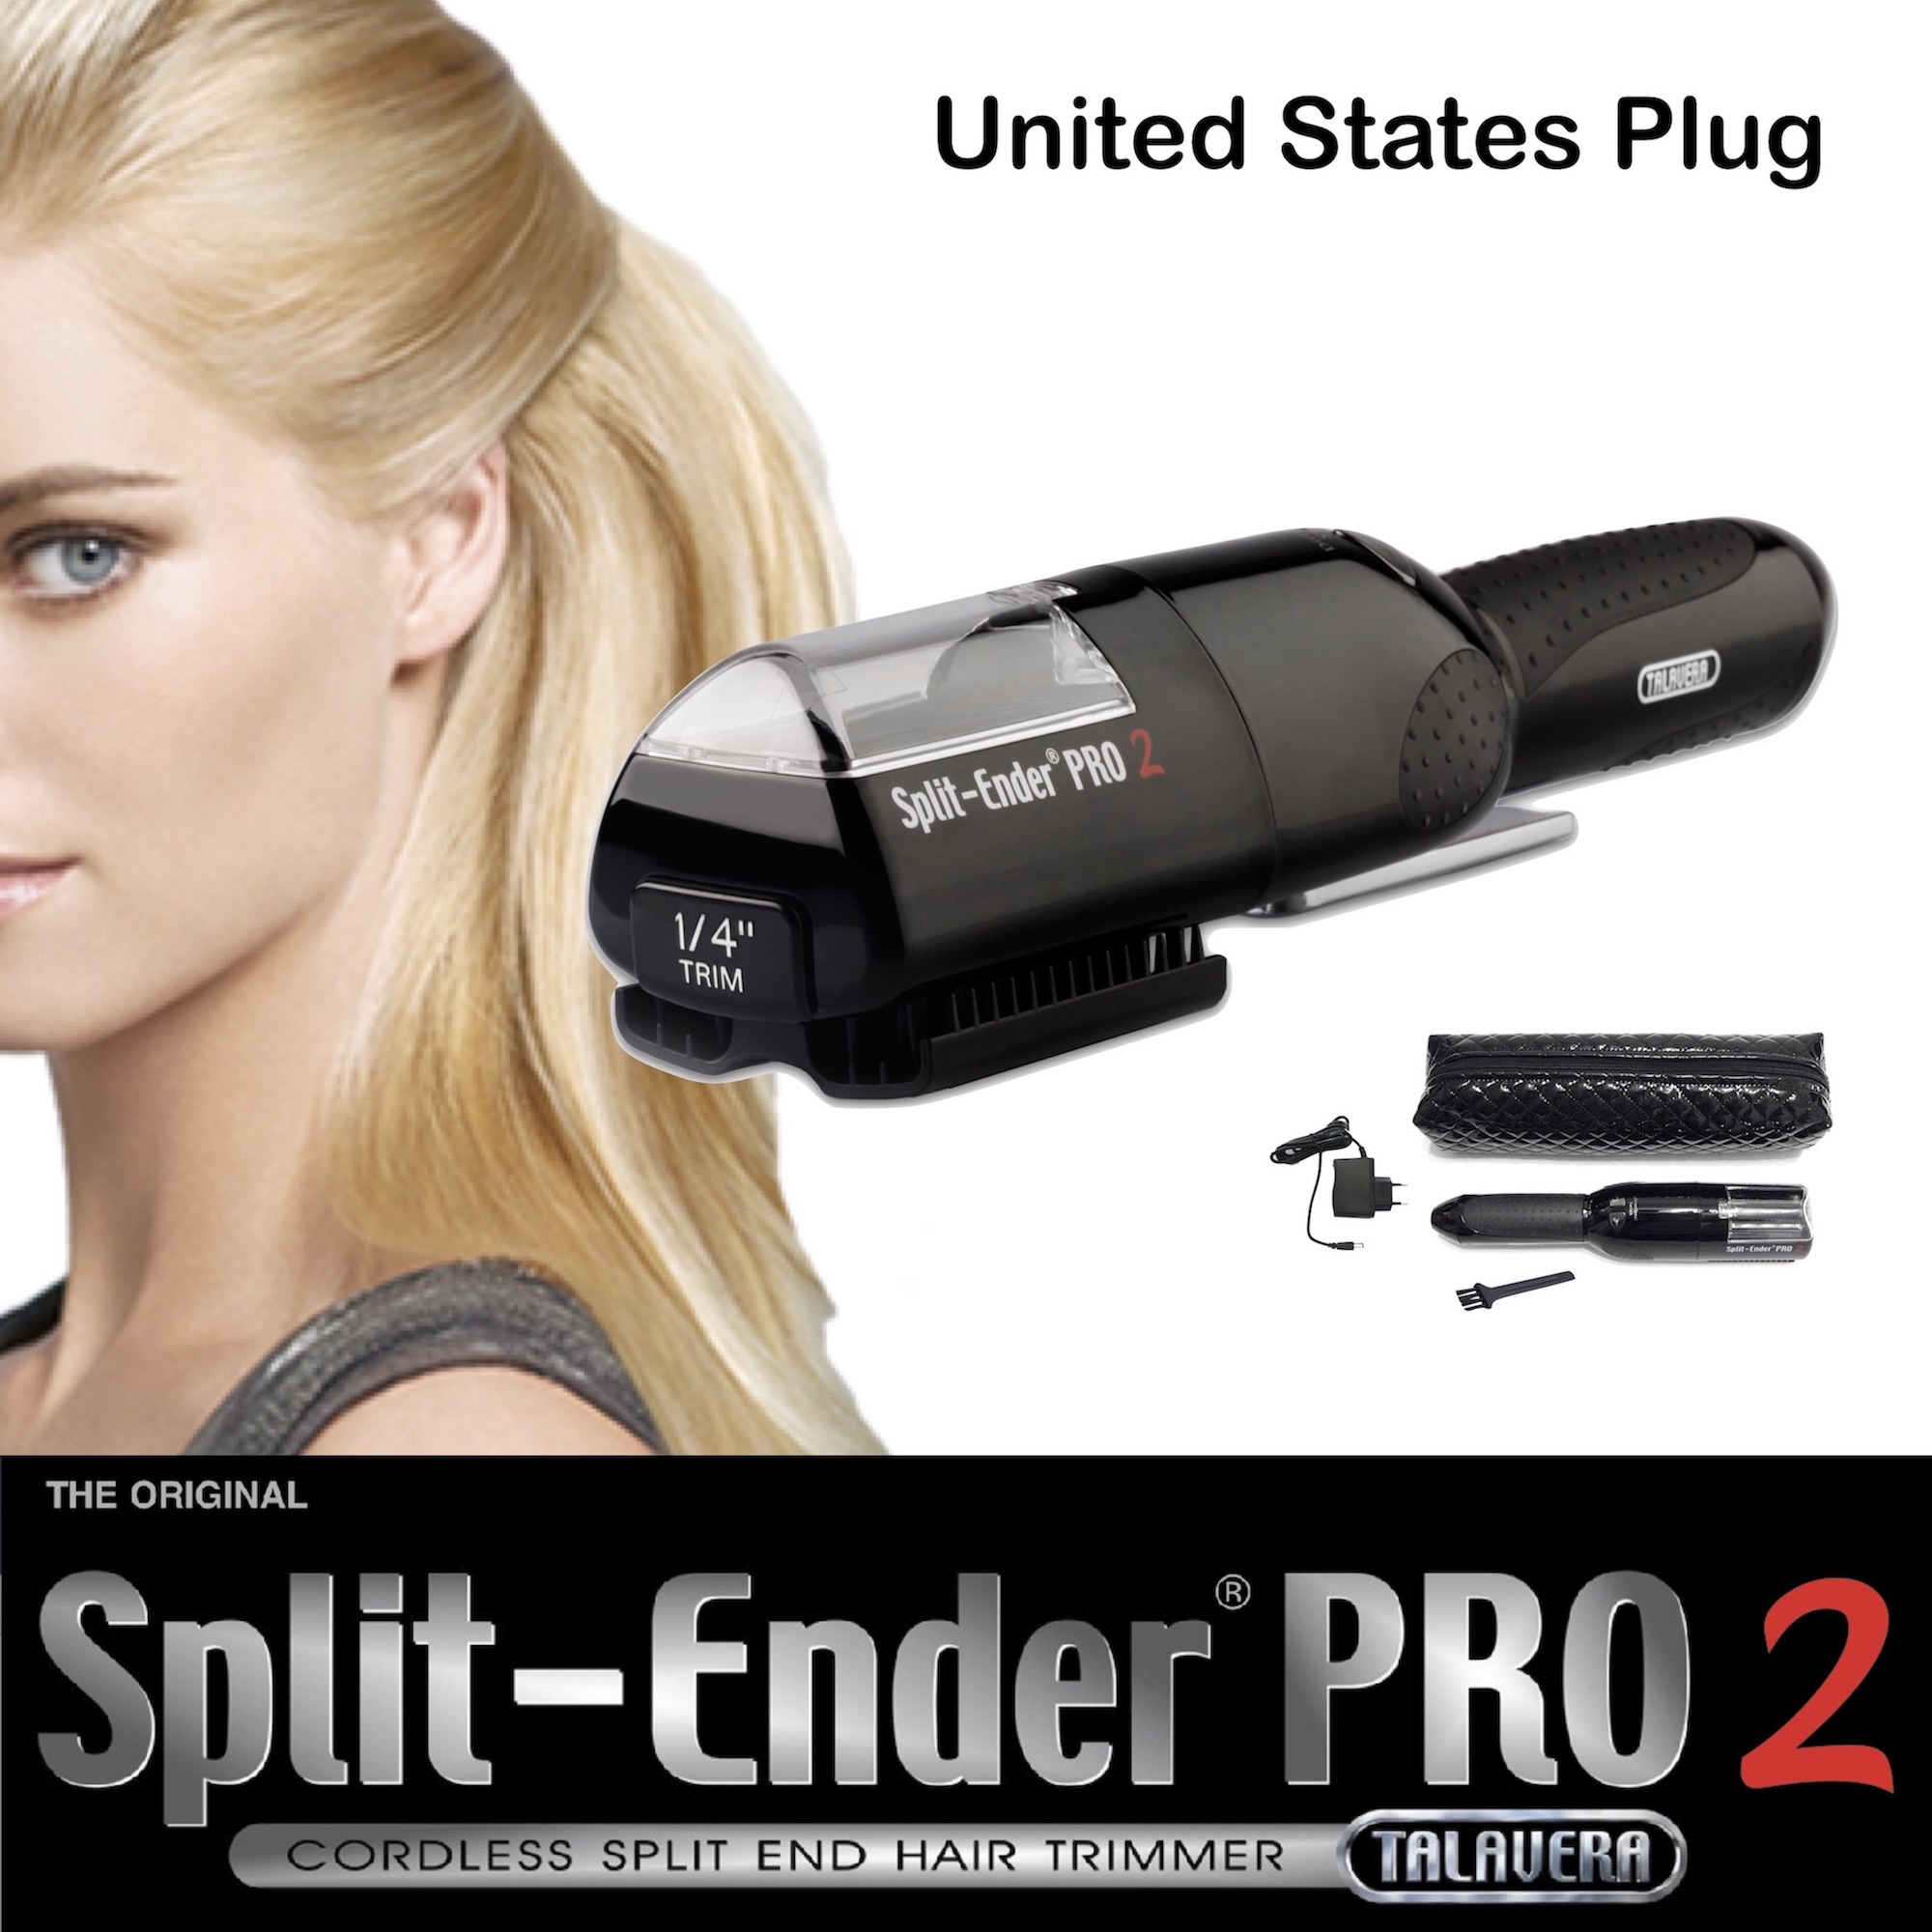 Split-Ender PRO2 Piano Black w. USA Charger - BUY NOW $149.99